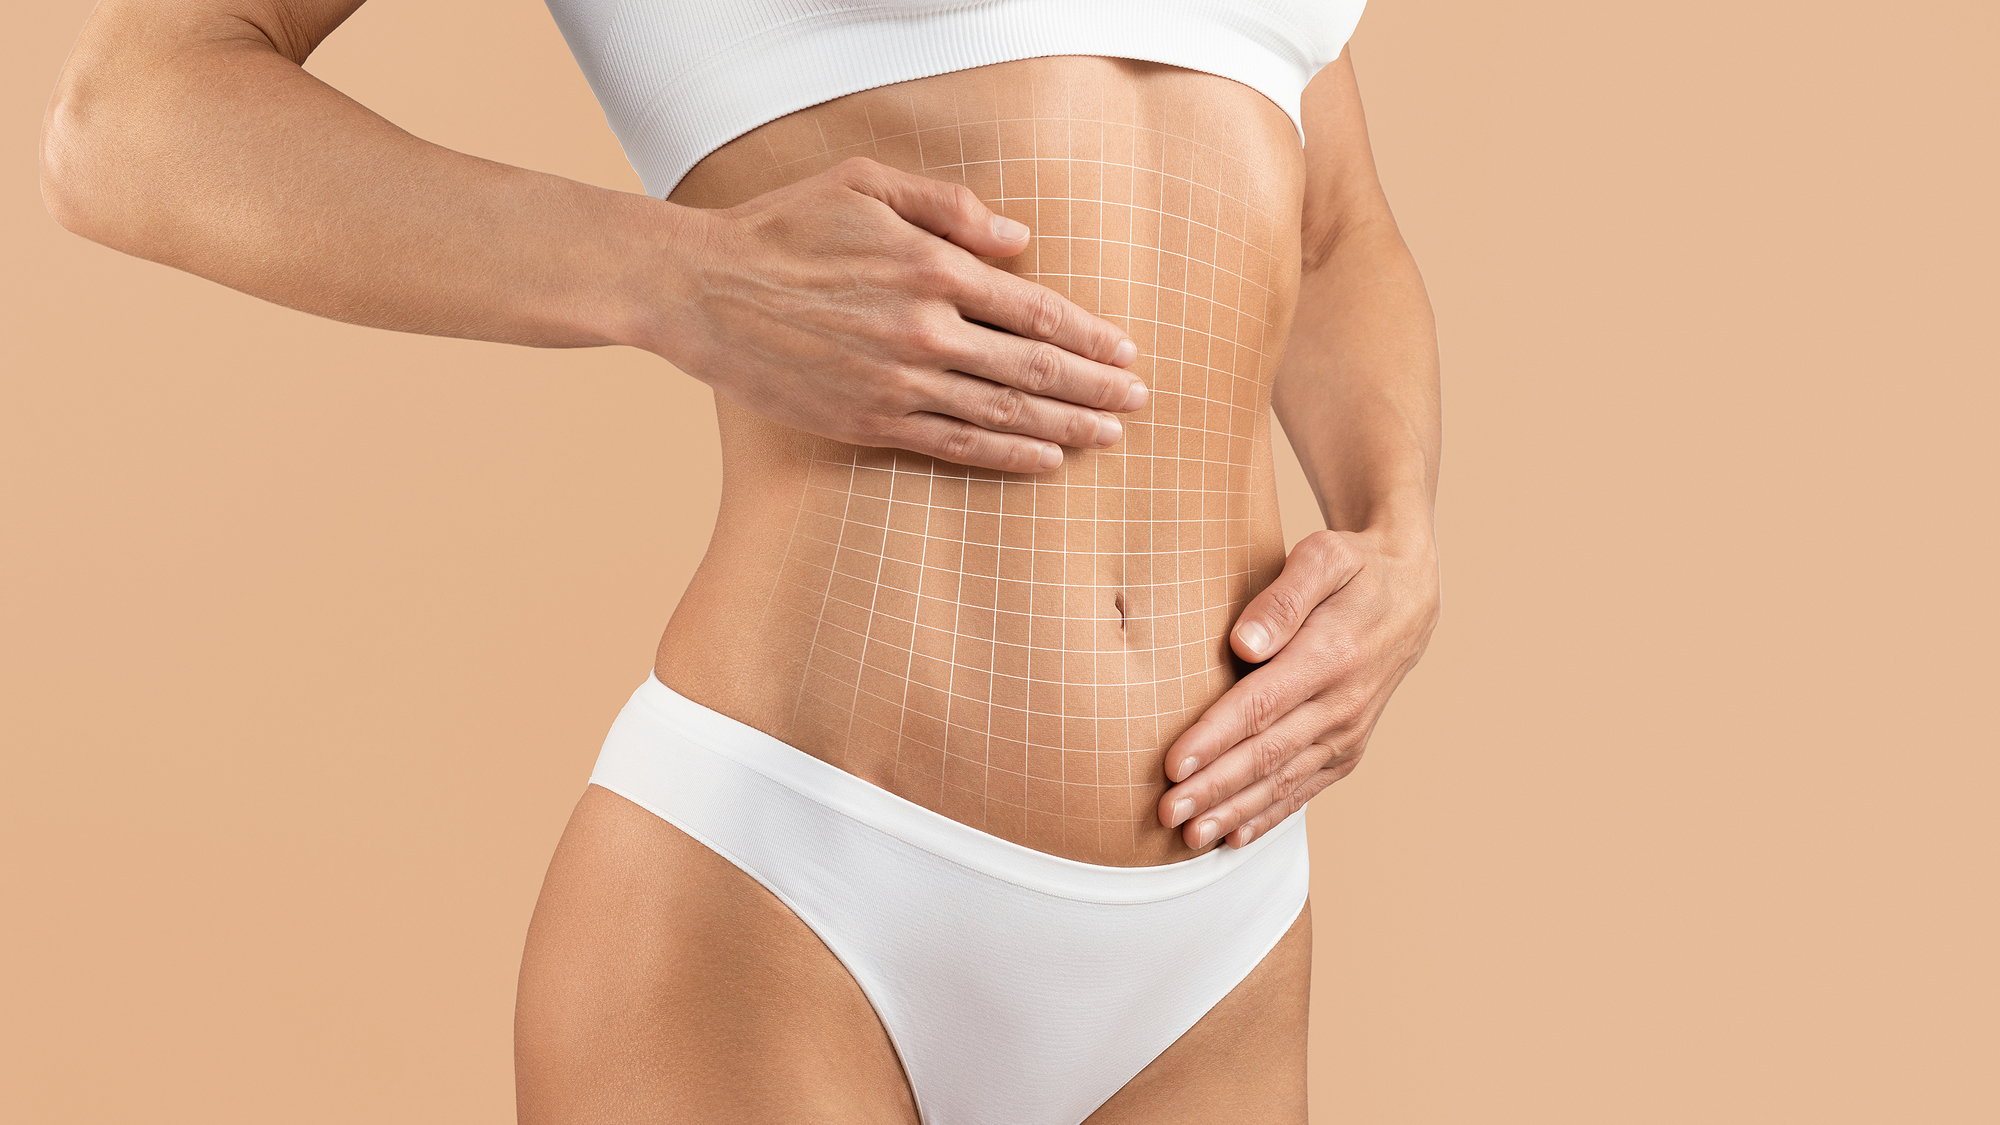 Woman after tummy tuck plastic surgery.